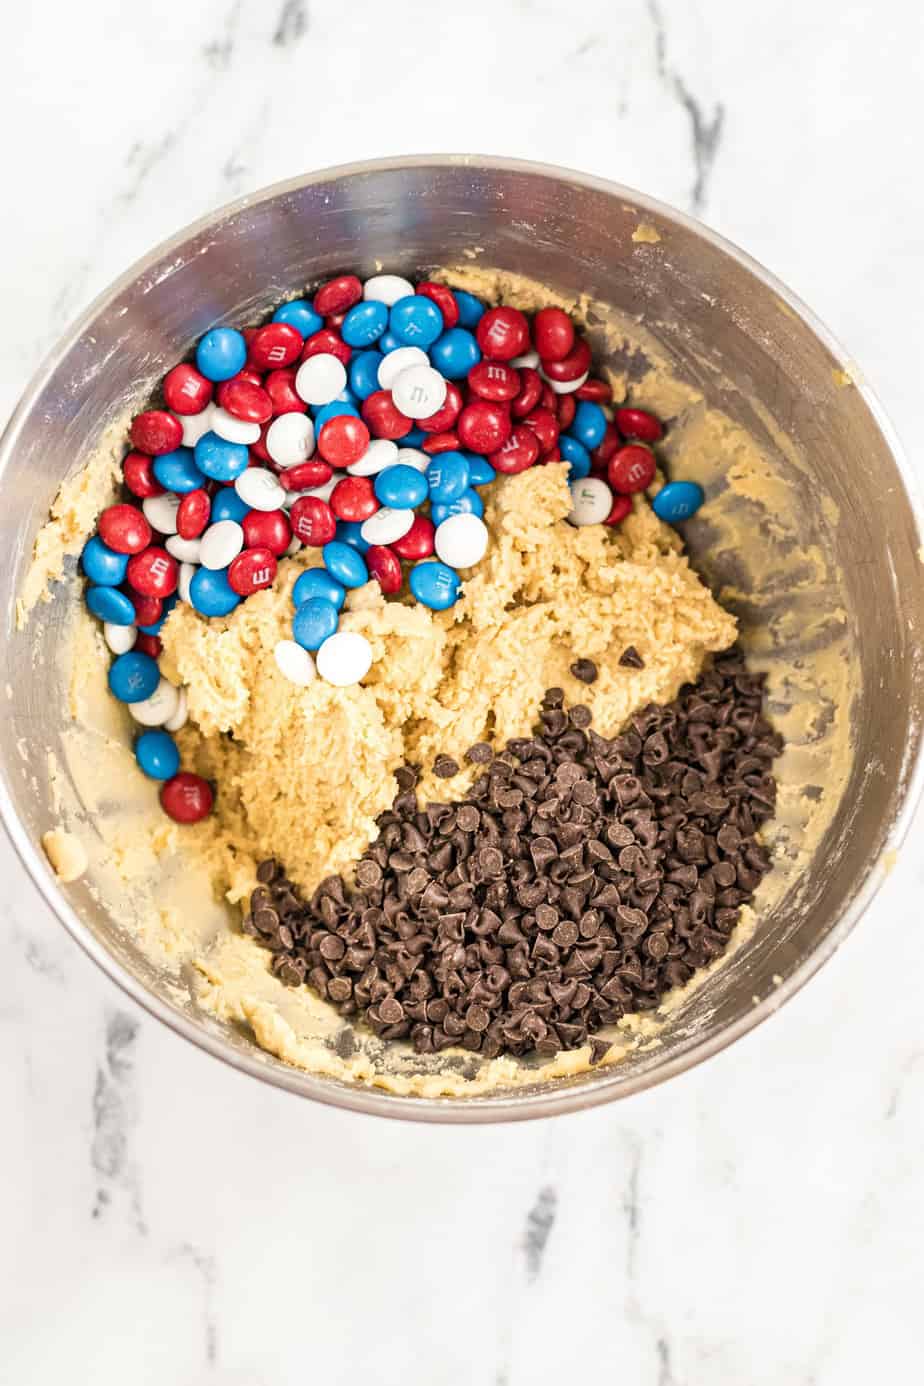 Cookie dough with red white and blue M&Ms and chocolate chips in a bowl.